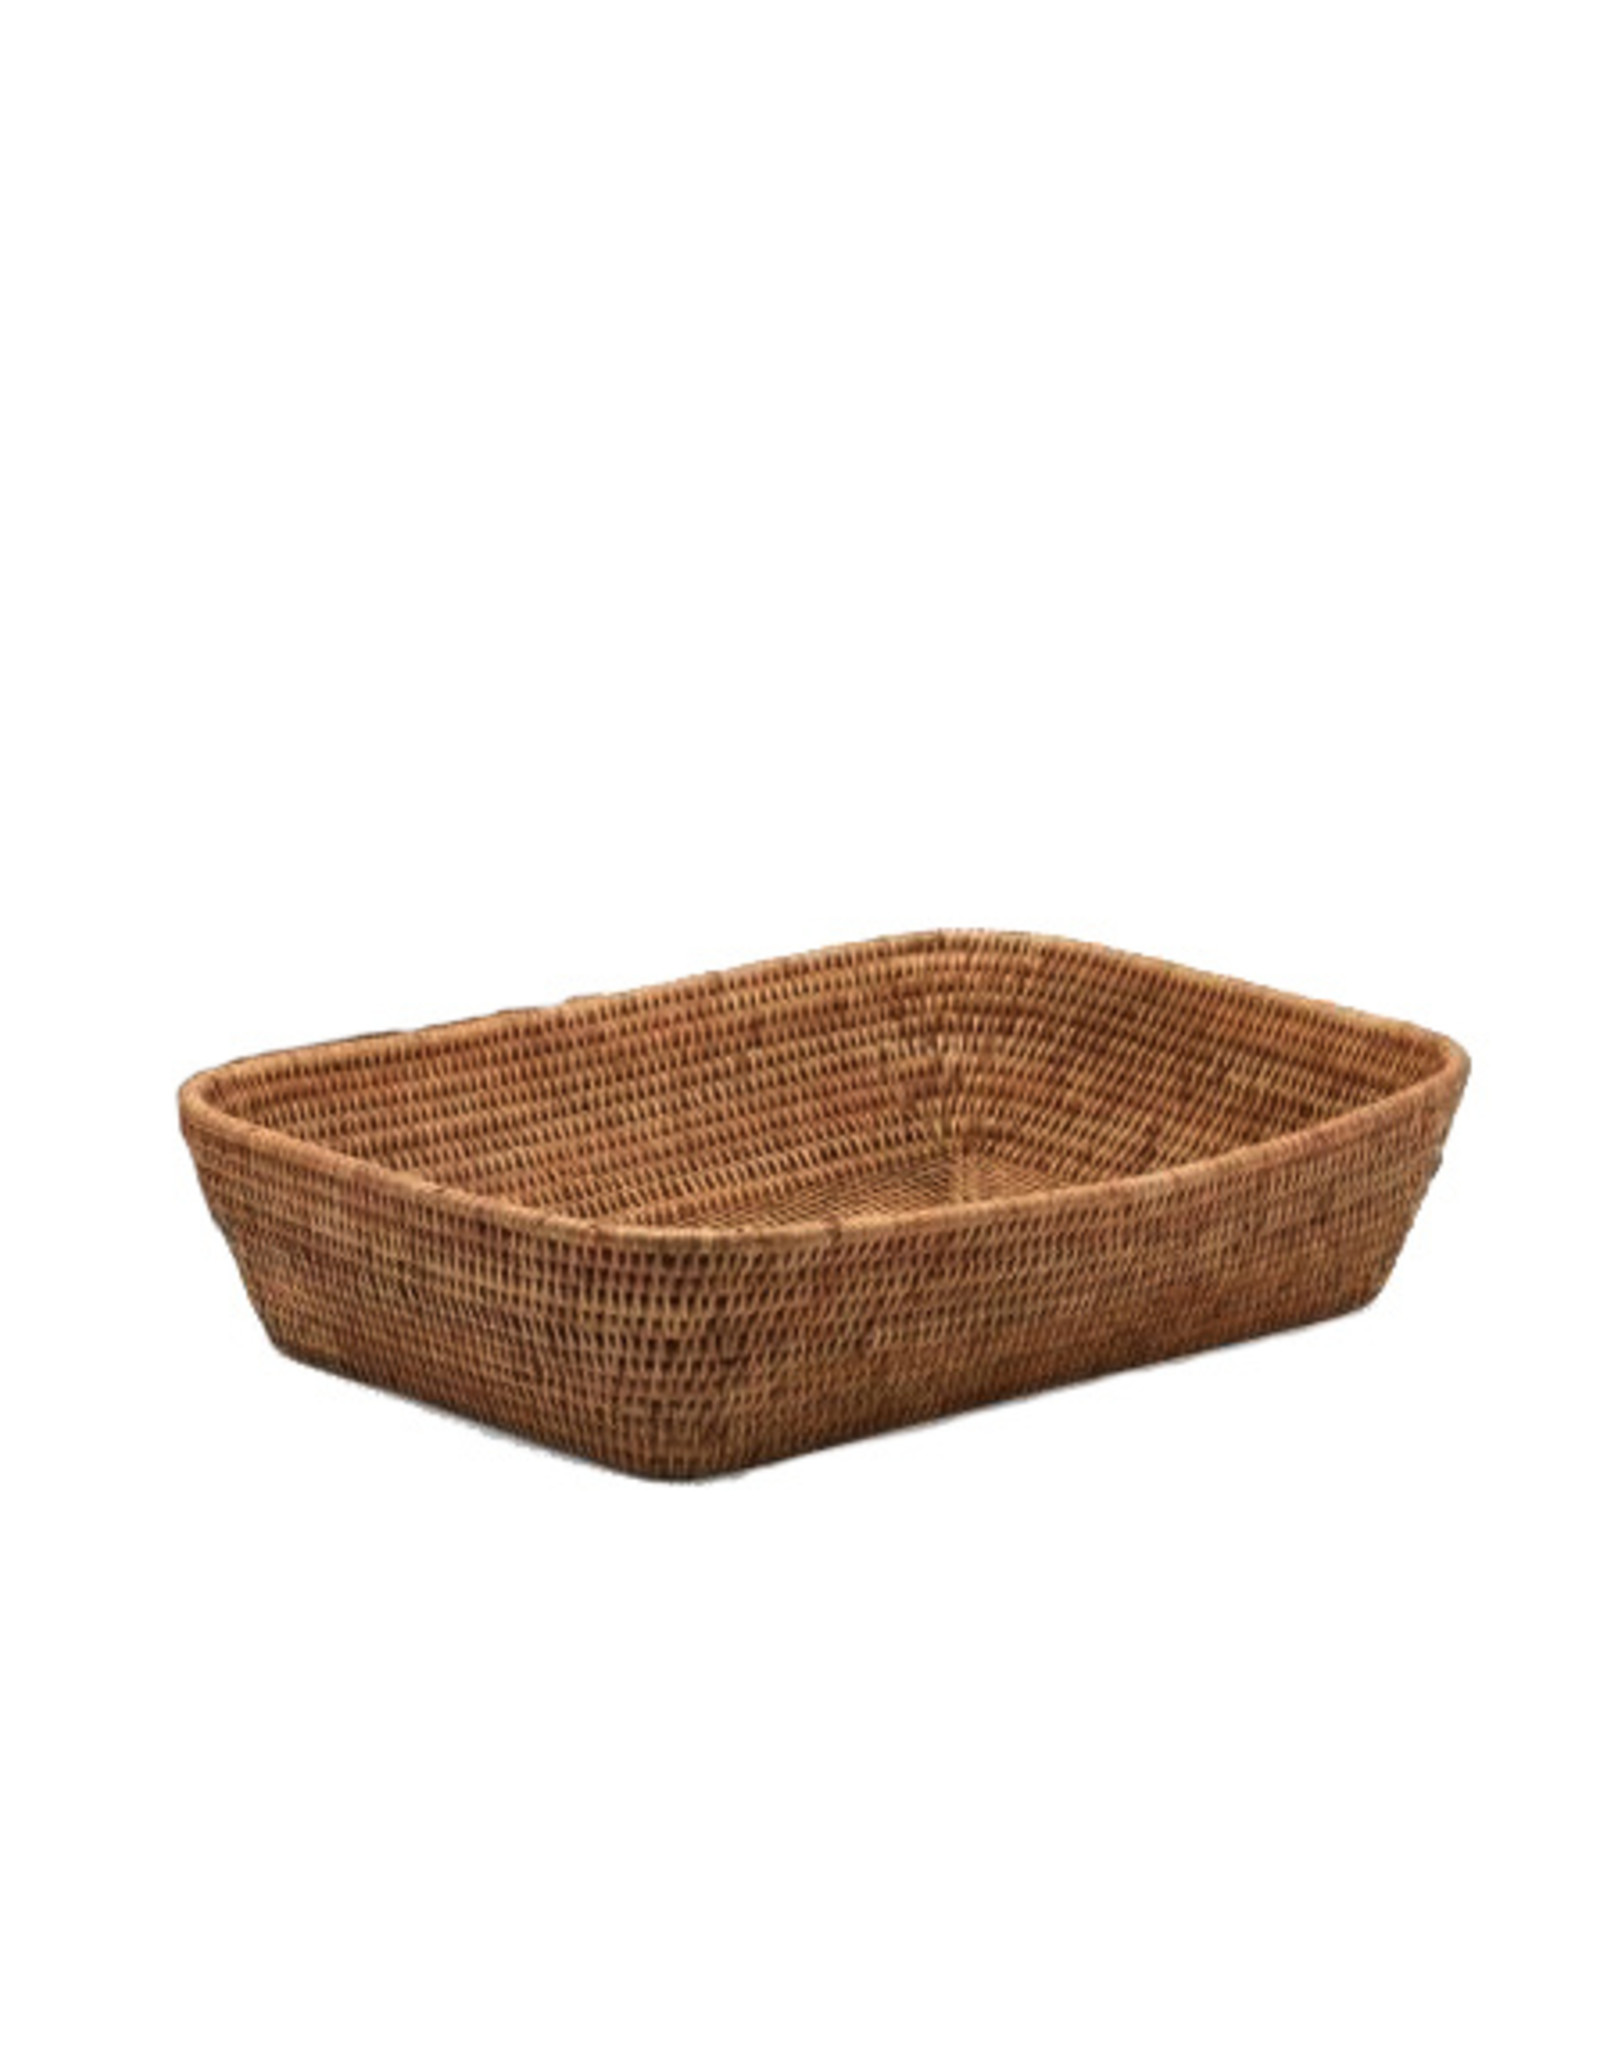 Pigeon and Poodle Natural Rattan Basket, S